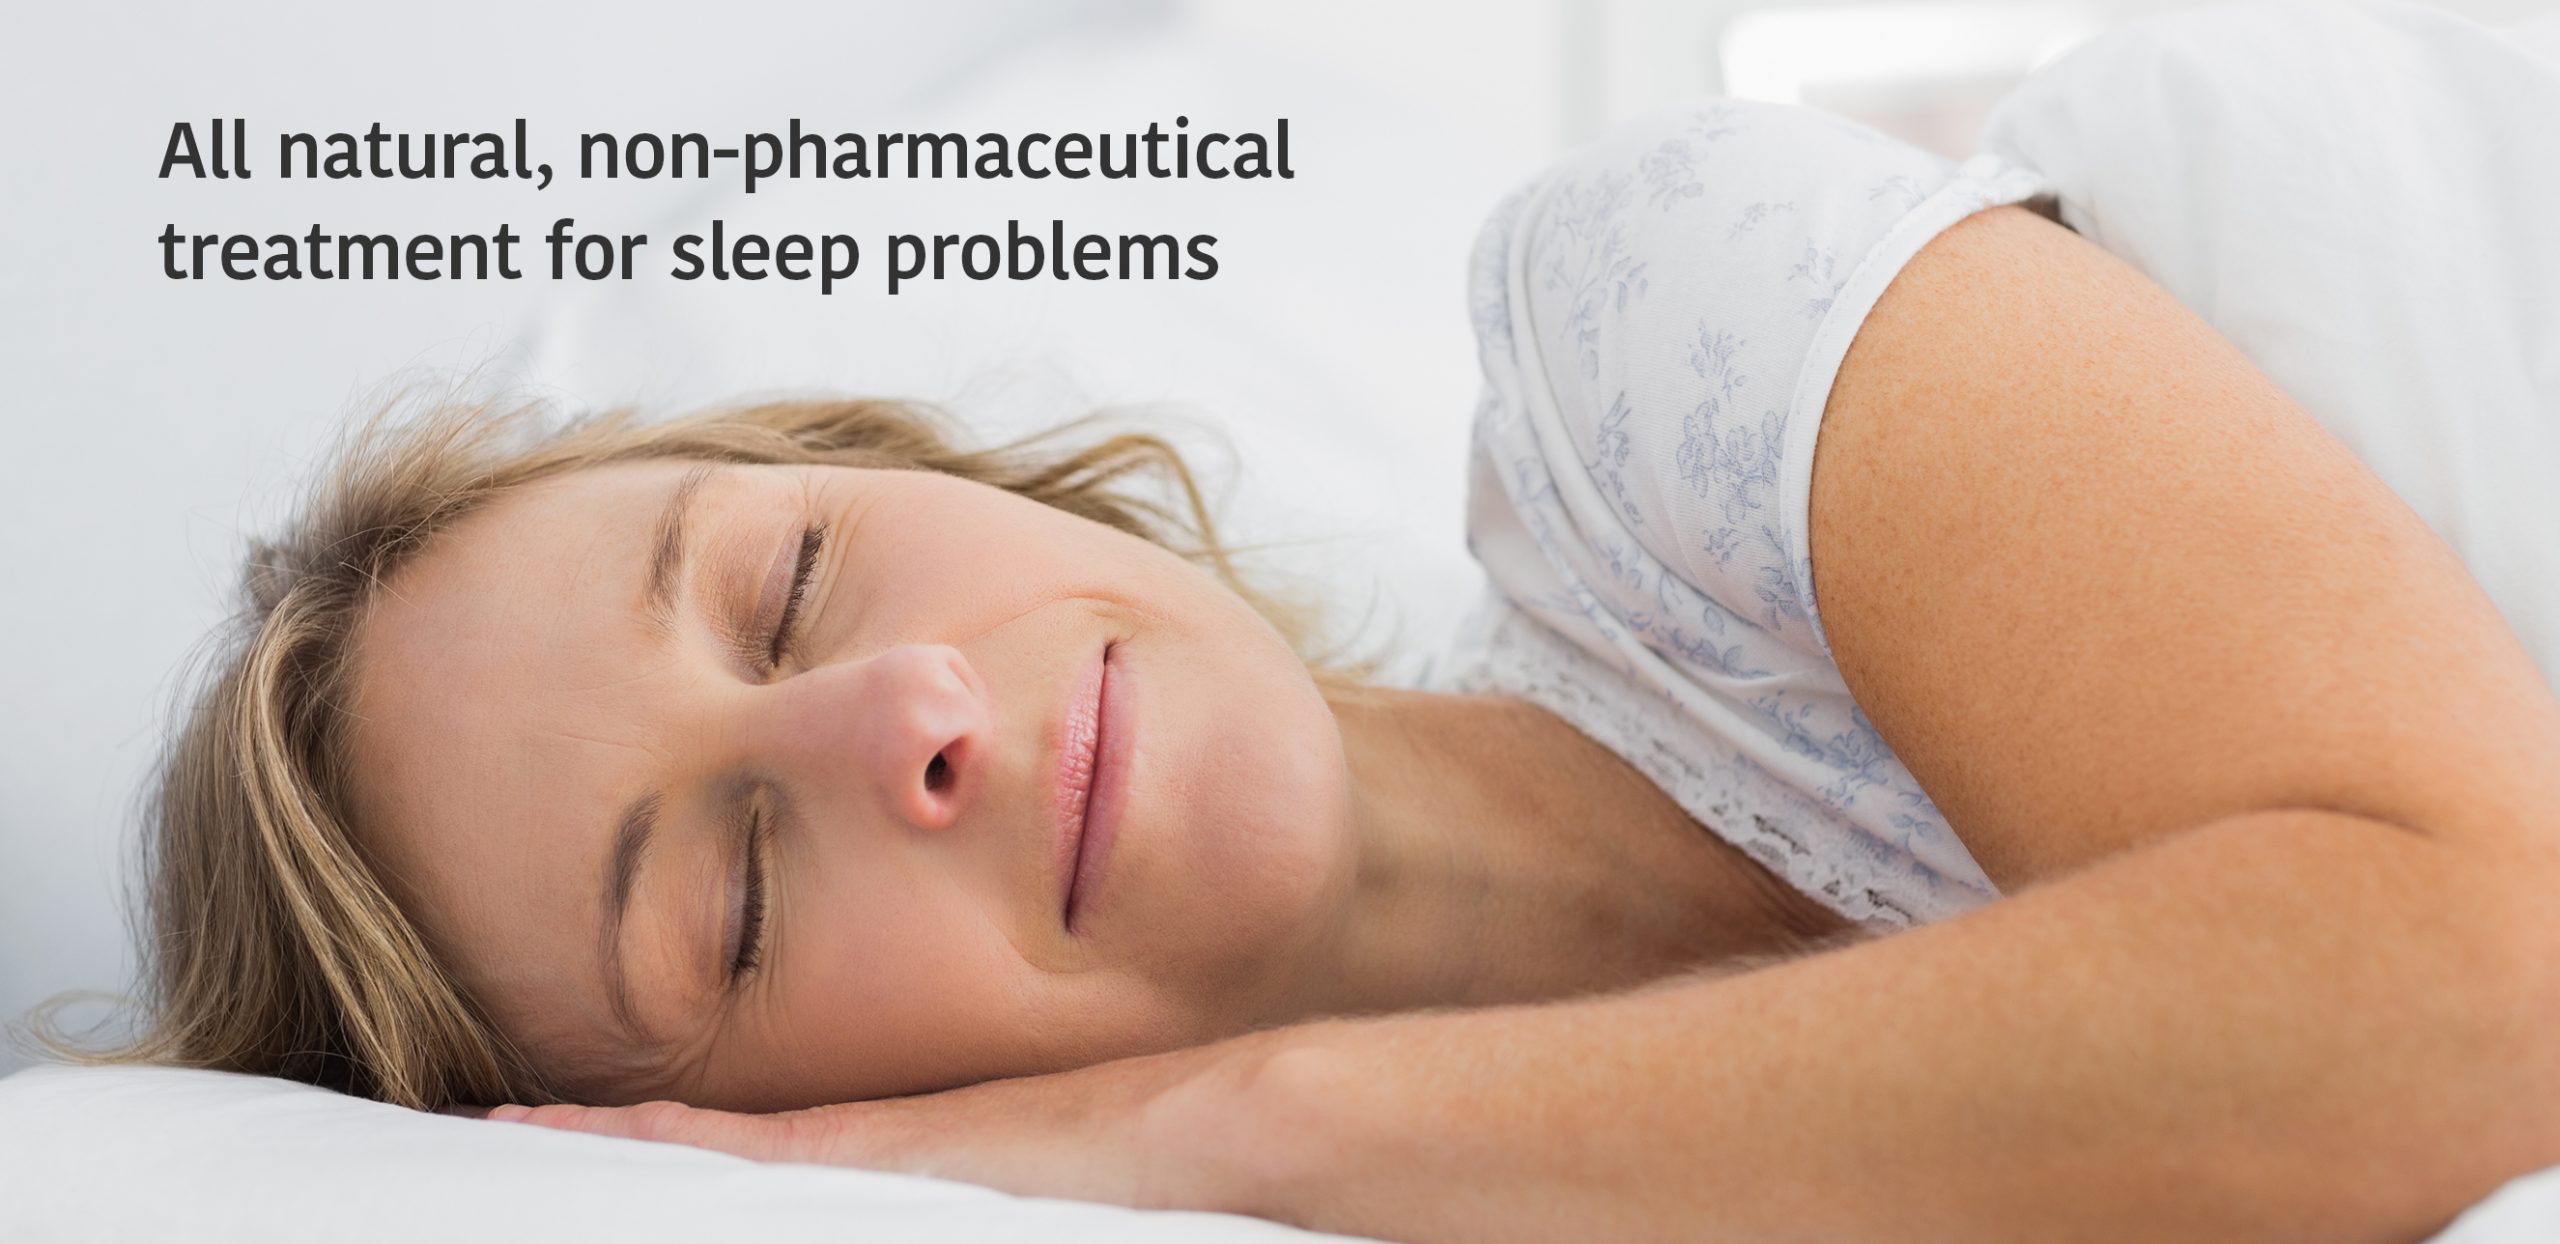 all natural, non-pharmaceutical treatment for sleep problems, woman sleeping in bed